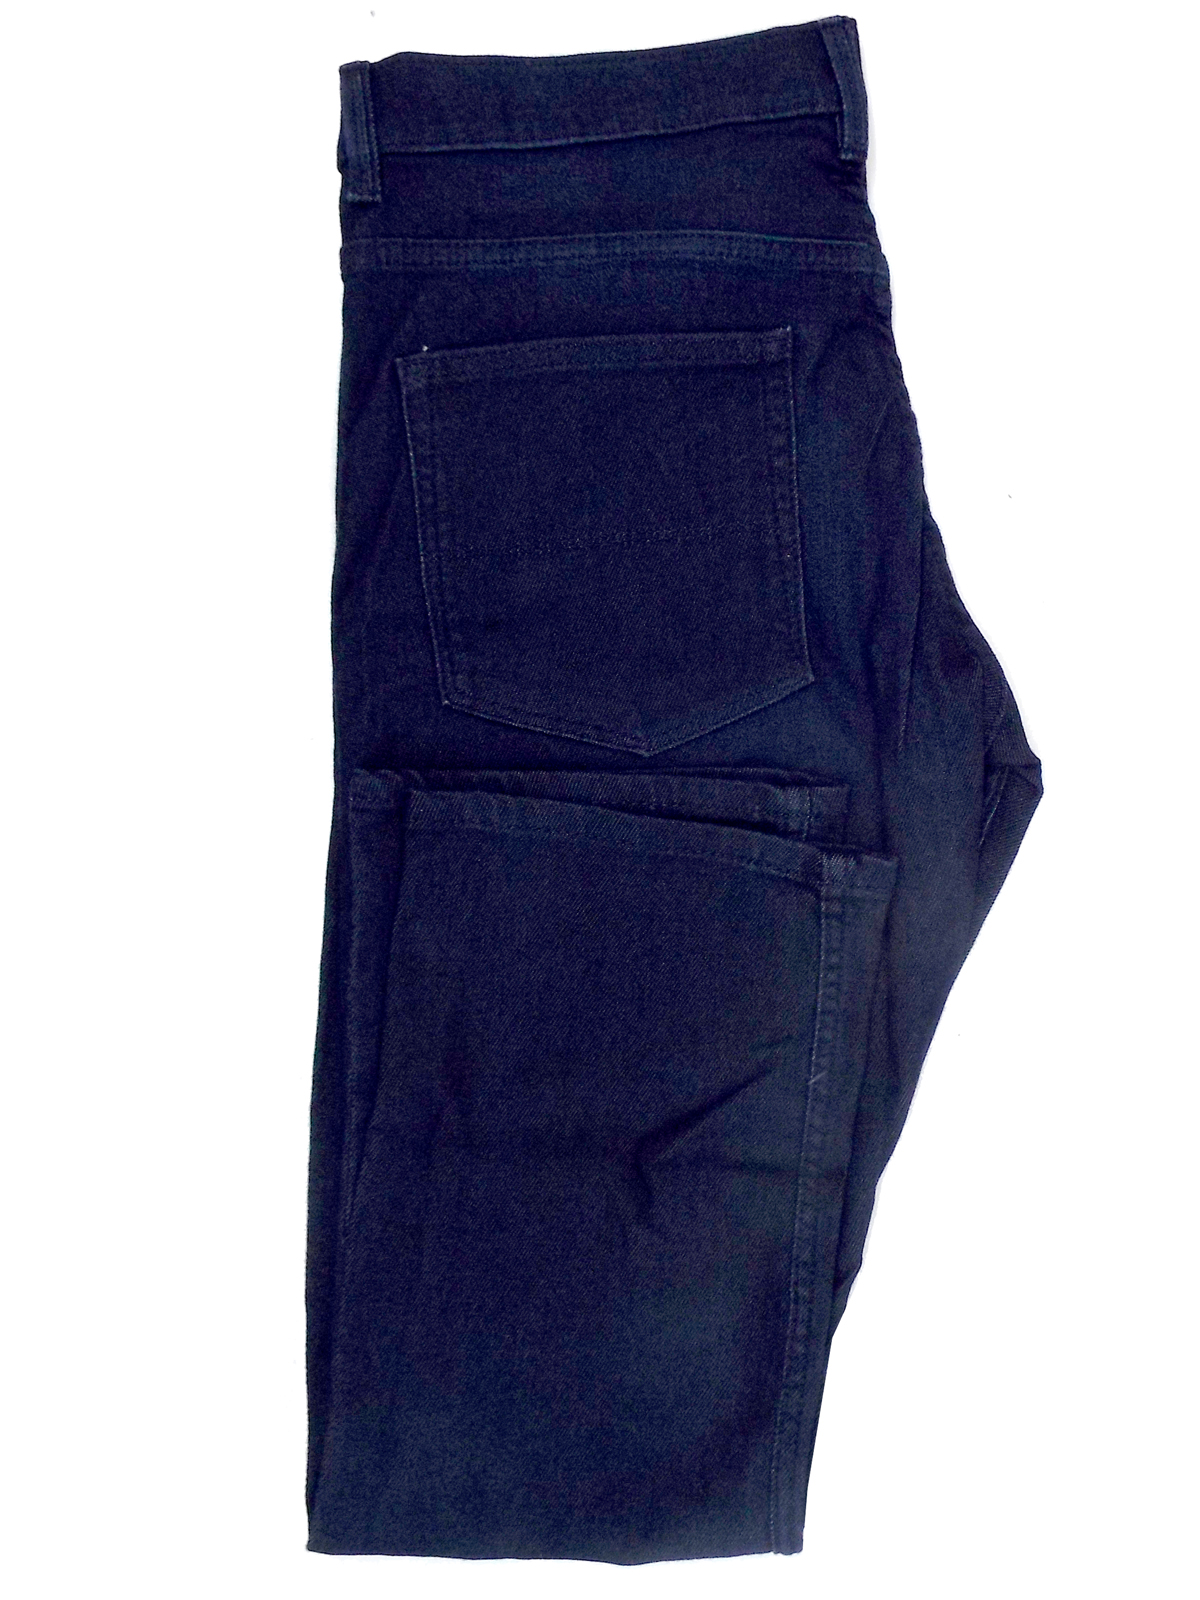 Marks and Spencer - - M&5 ASSORTED Mens Trousers - Waist Size 29 to 38 ...